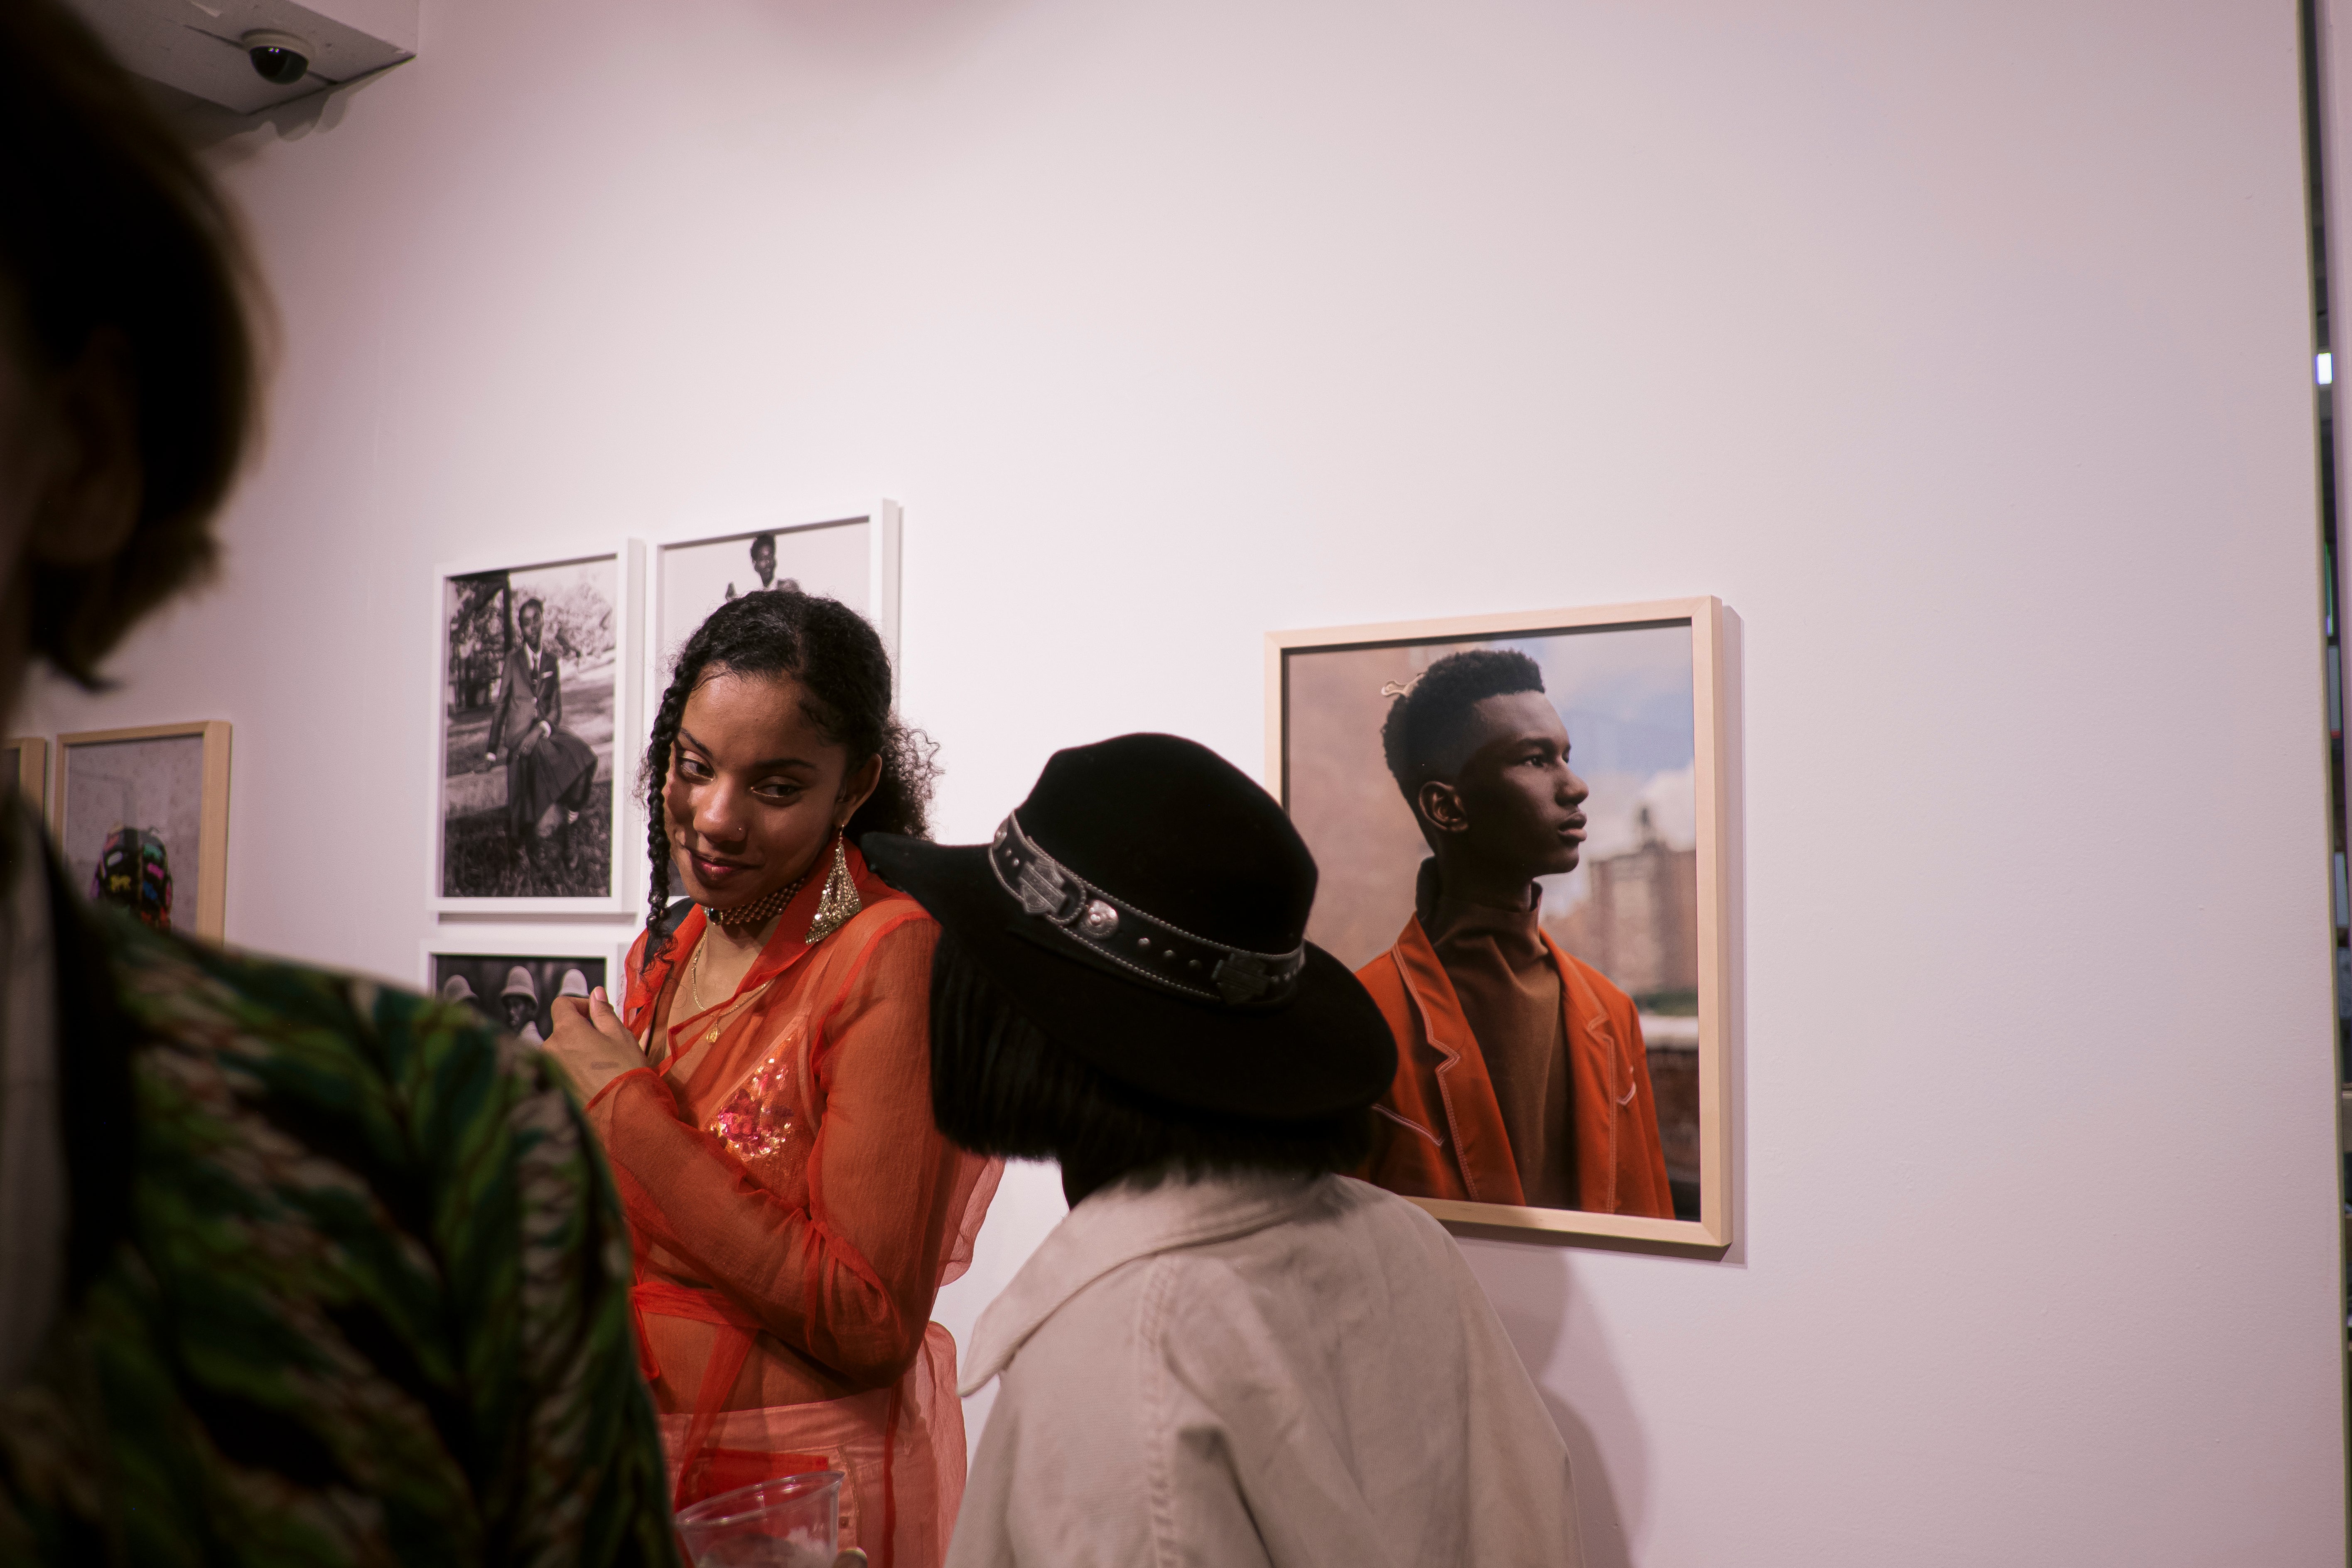 ‘The New Black Vanguard: Photography Between Art and Fashion’